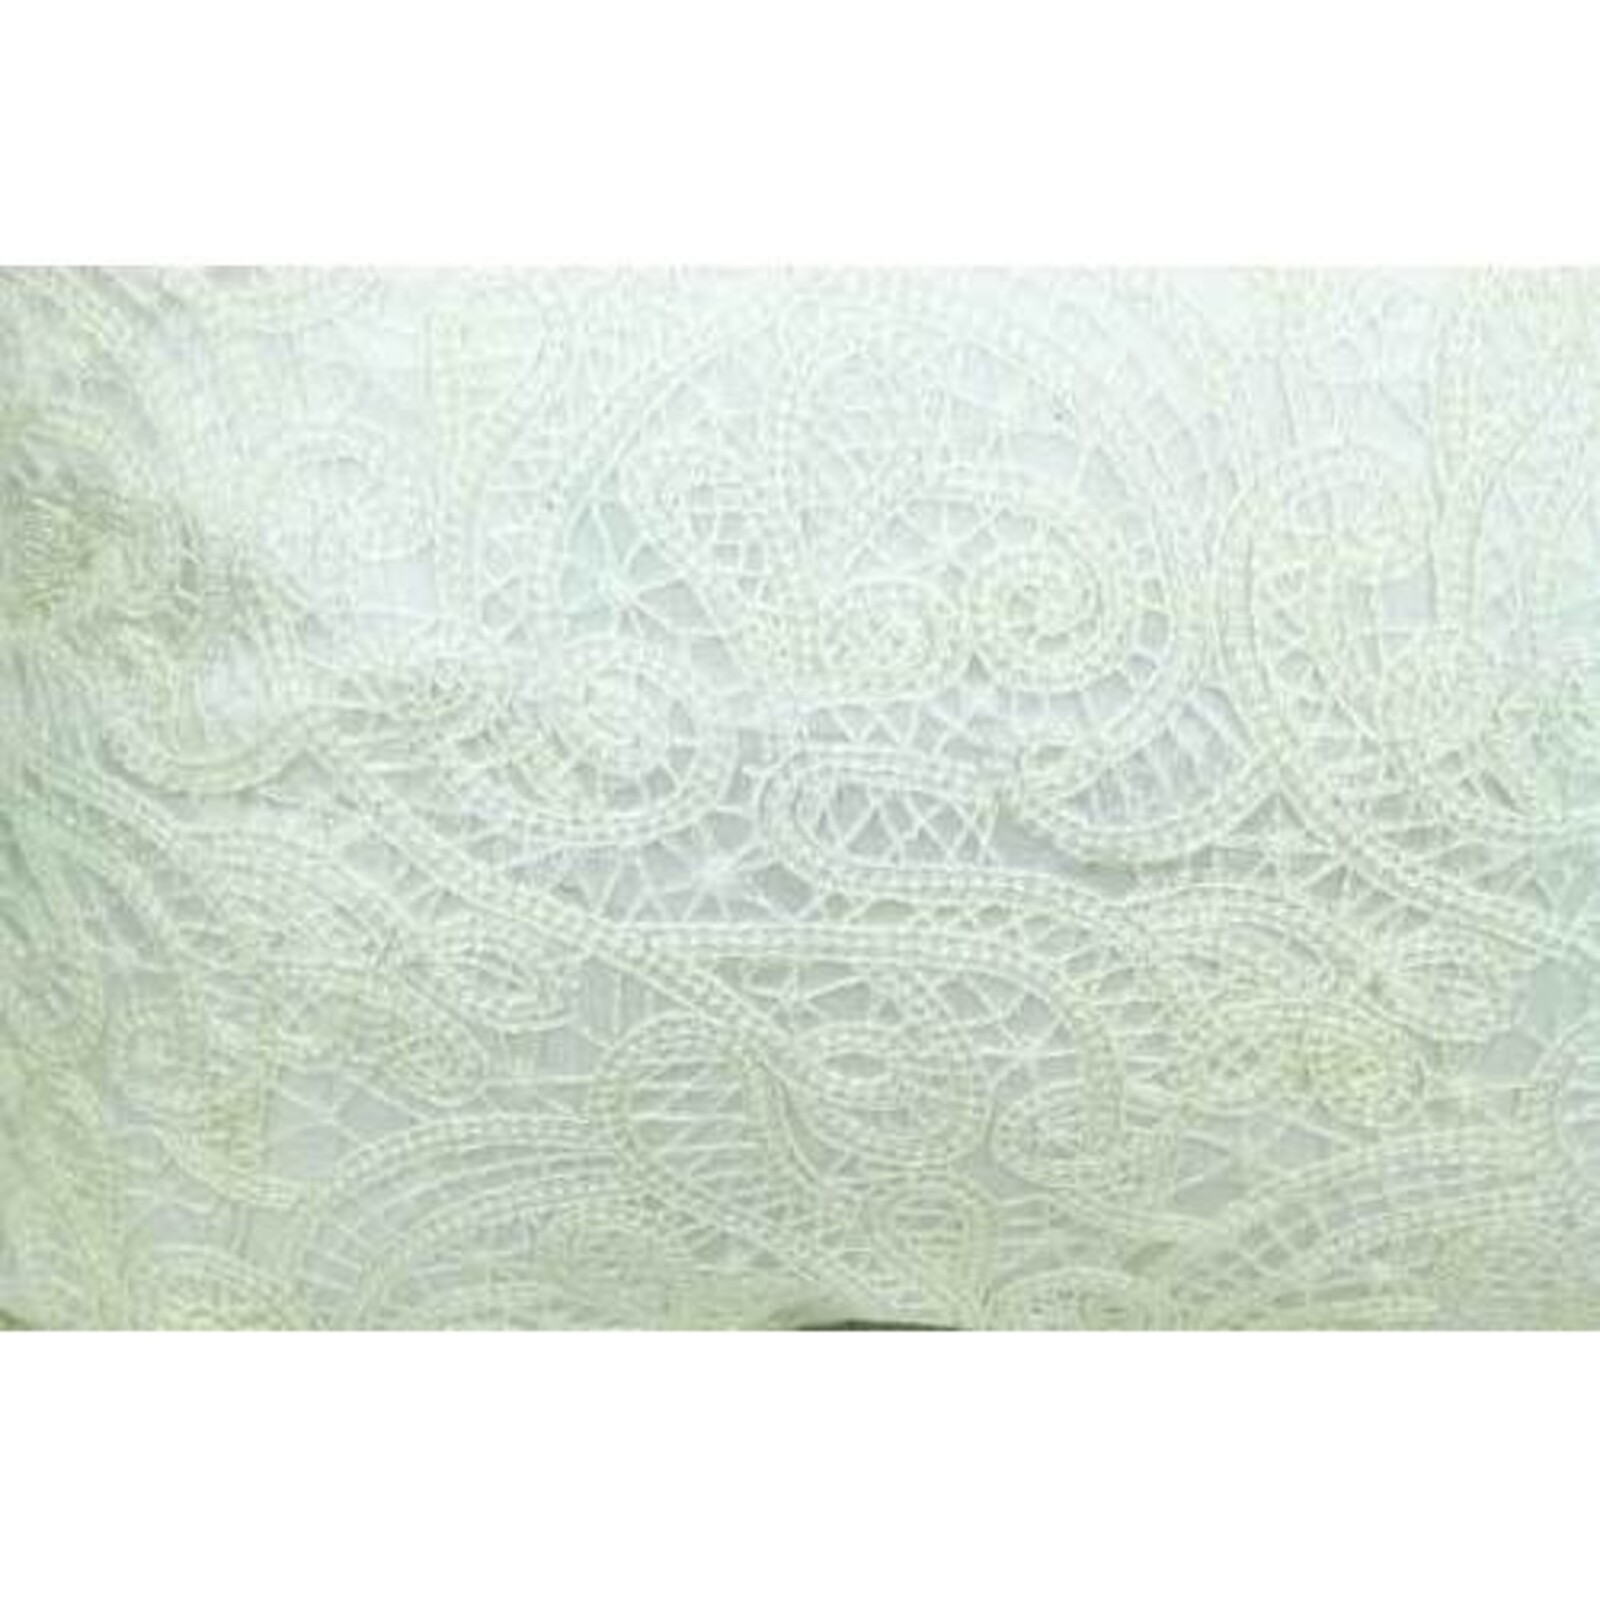 Table Runner Cream Lace Long